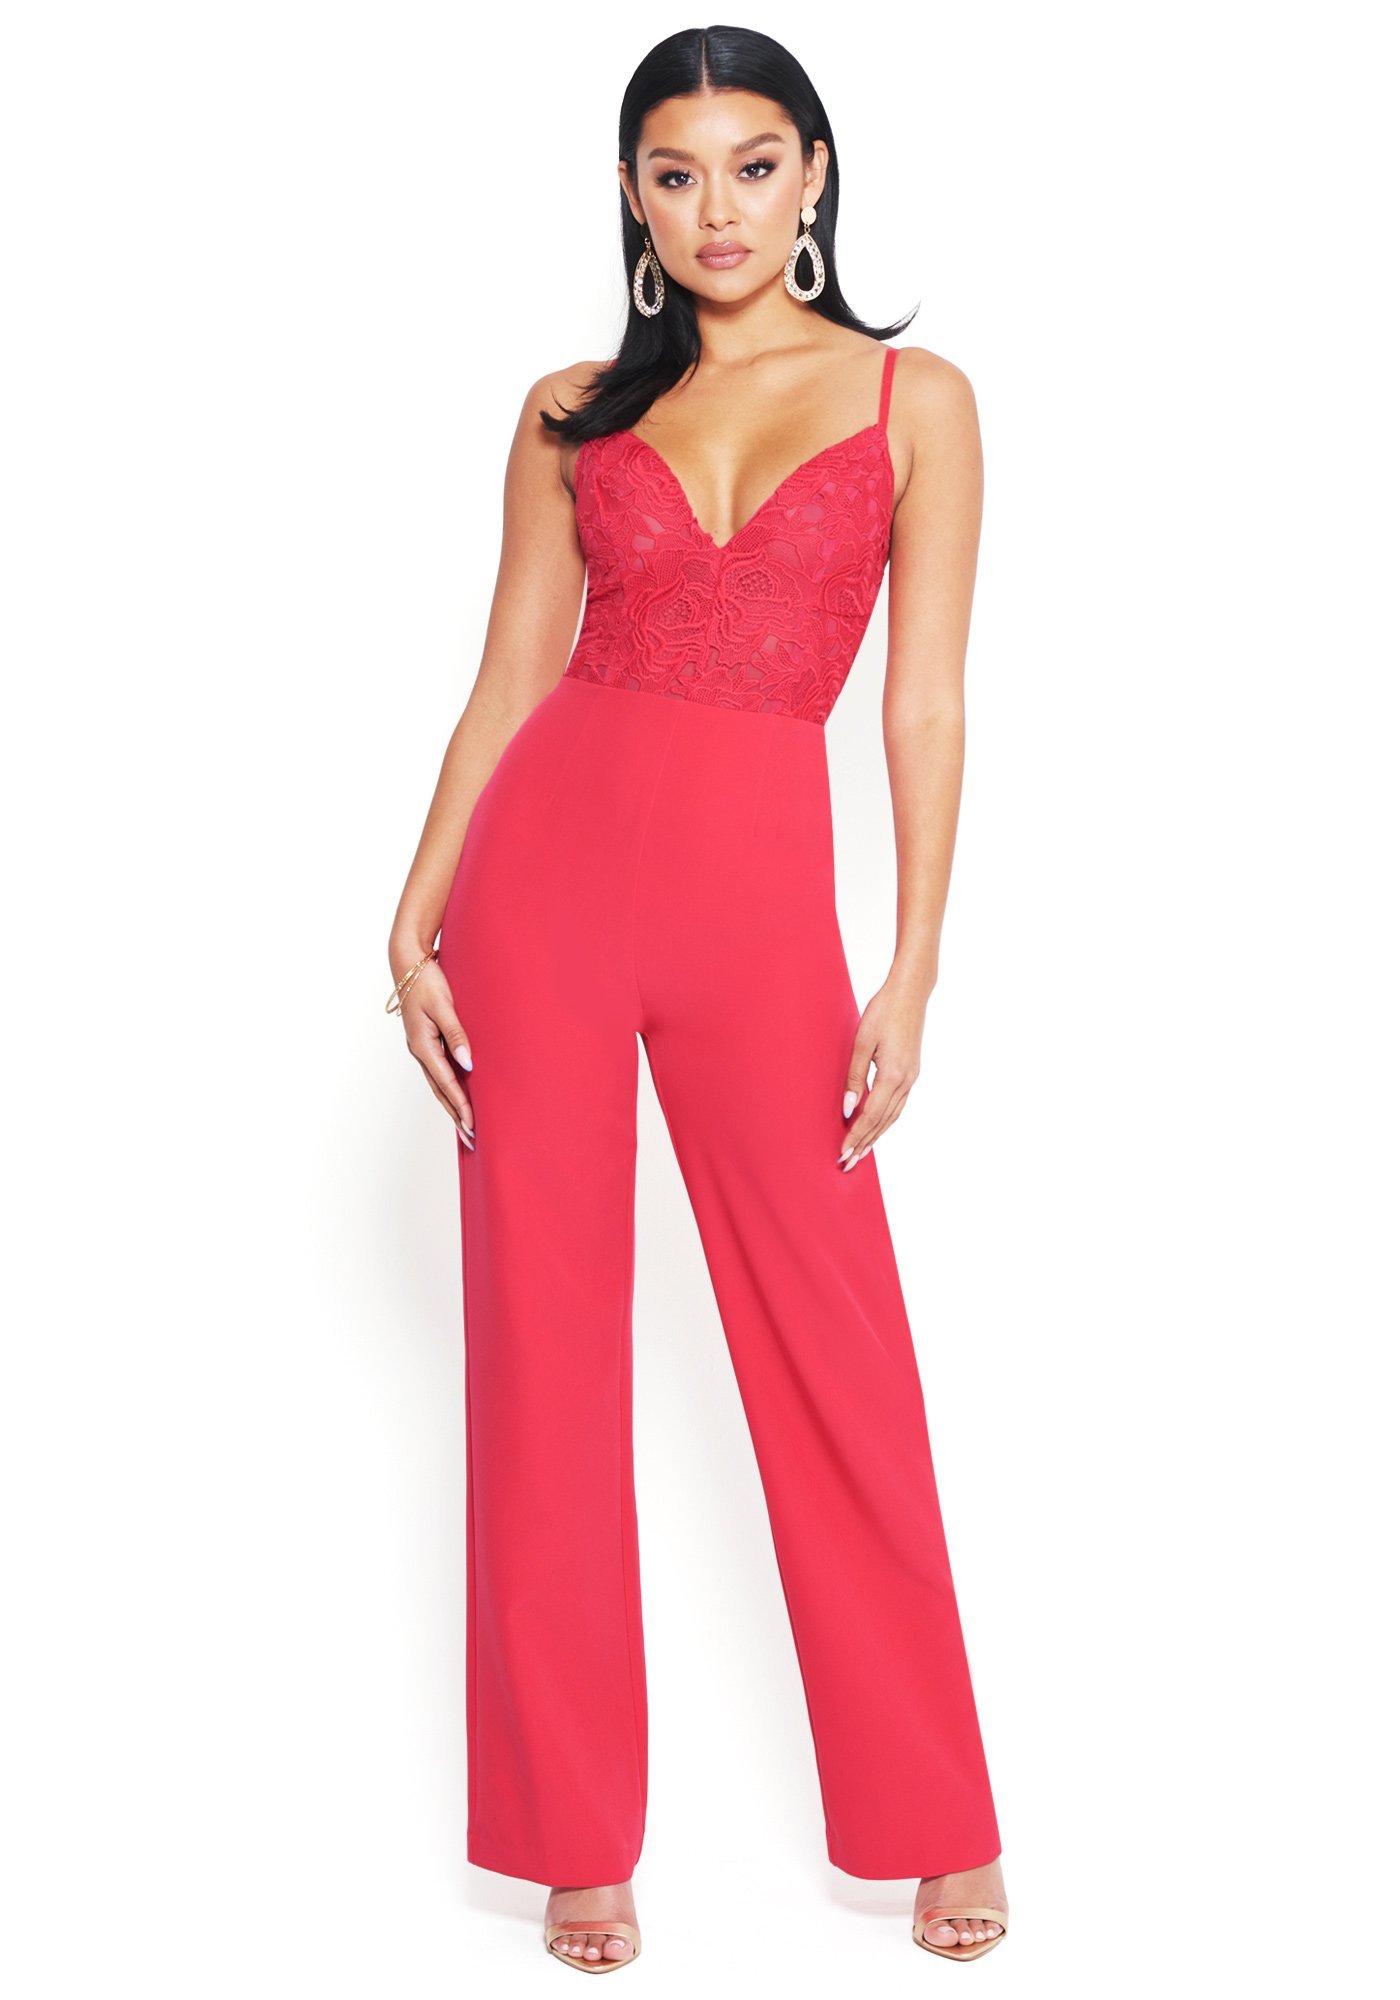 Bebe Women's Embroidered Lace Jumpsuit, Size 8 in Love Potion